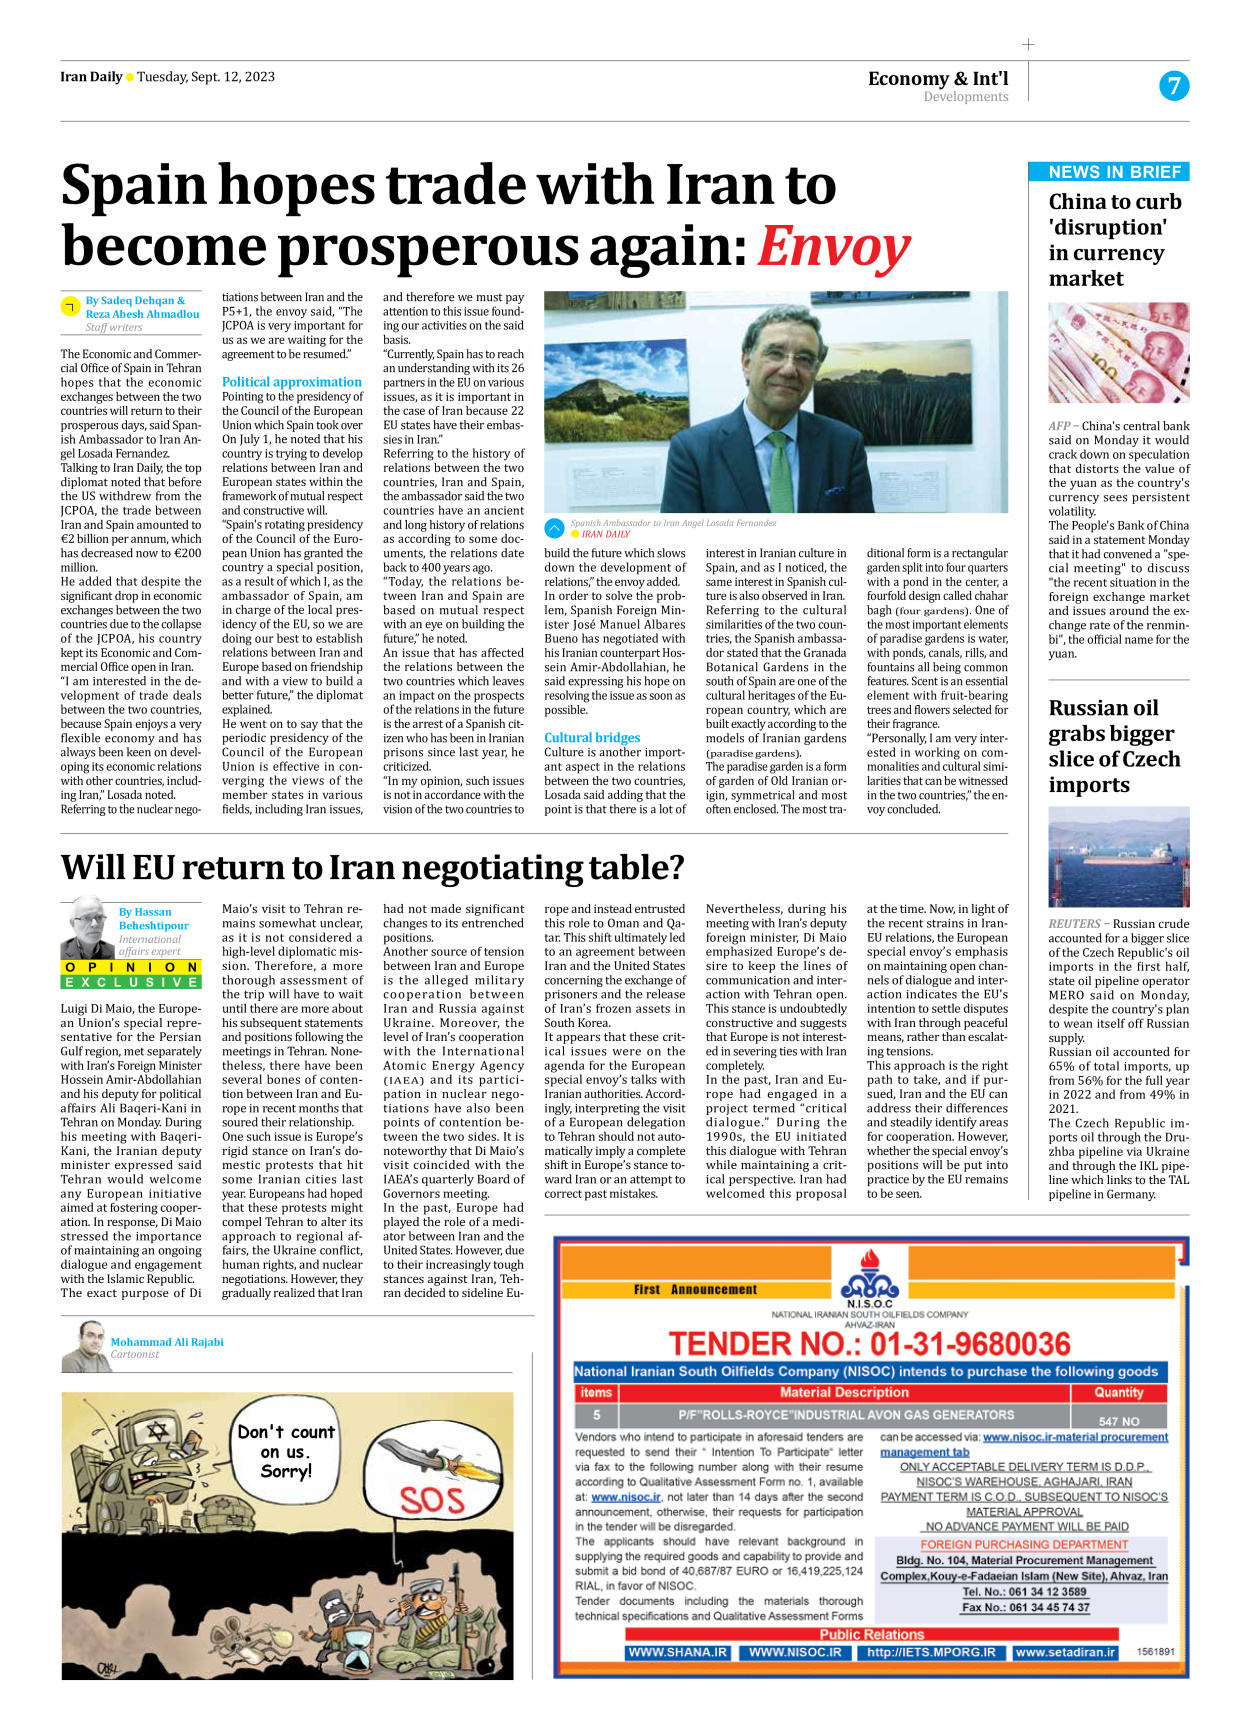 Iran Daily - Number Seven Thousand Three Hundred and Eighty Five - 12 September 2023 - Page 7